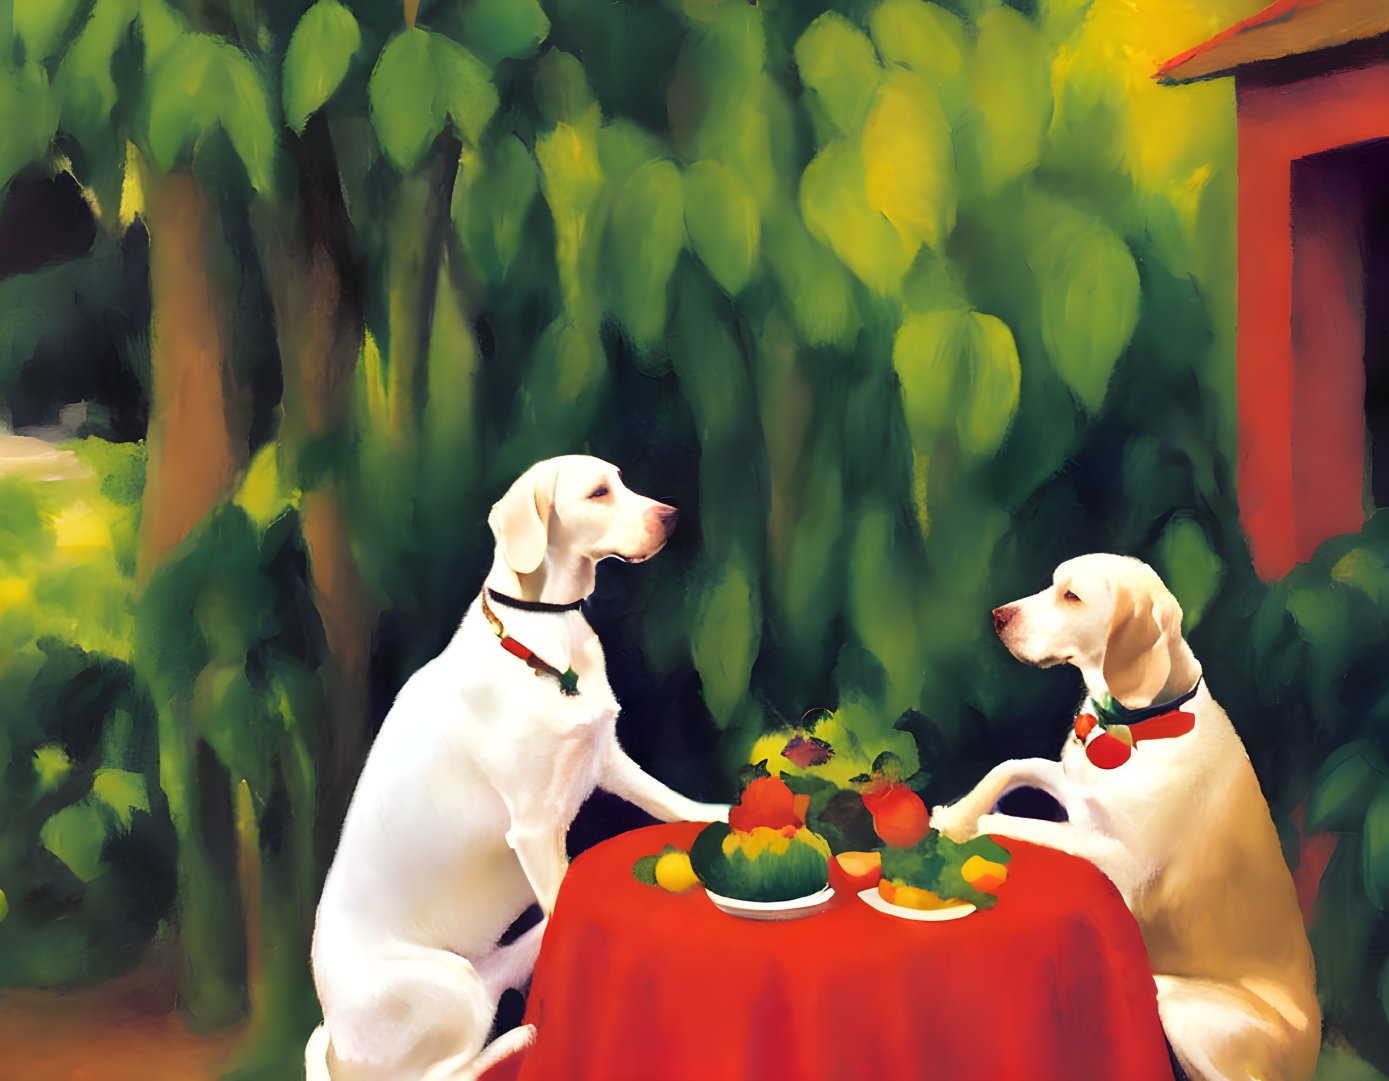 Two White Dogs Sitting at Table with Fruit in Garden Setting